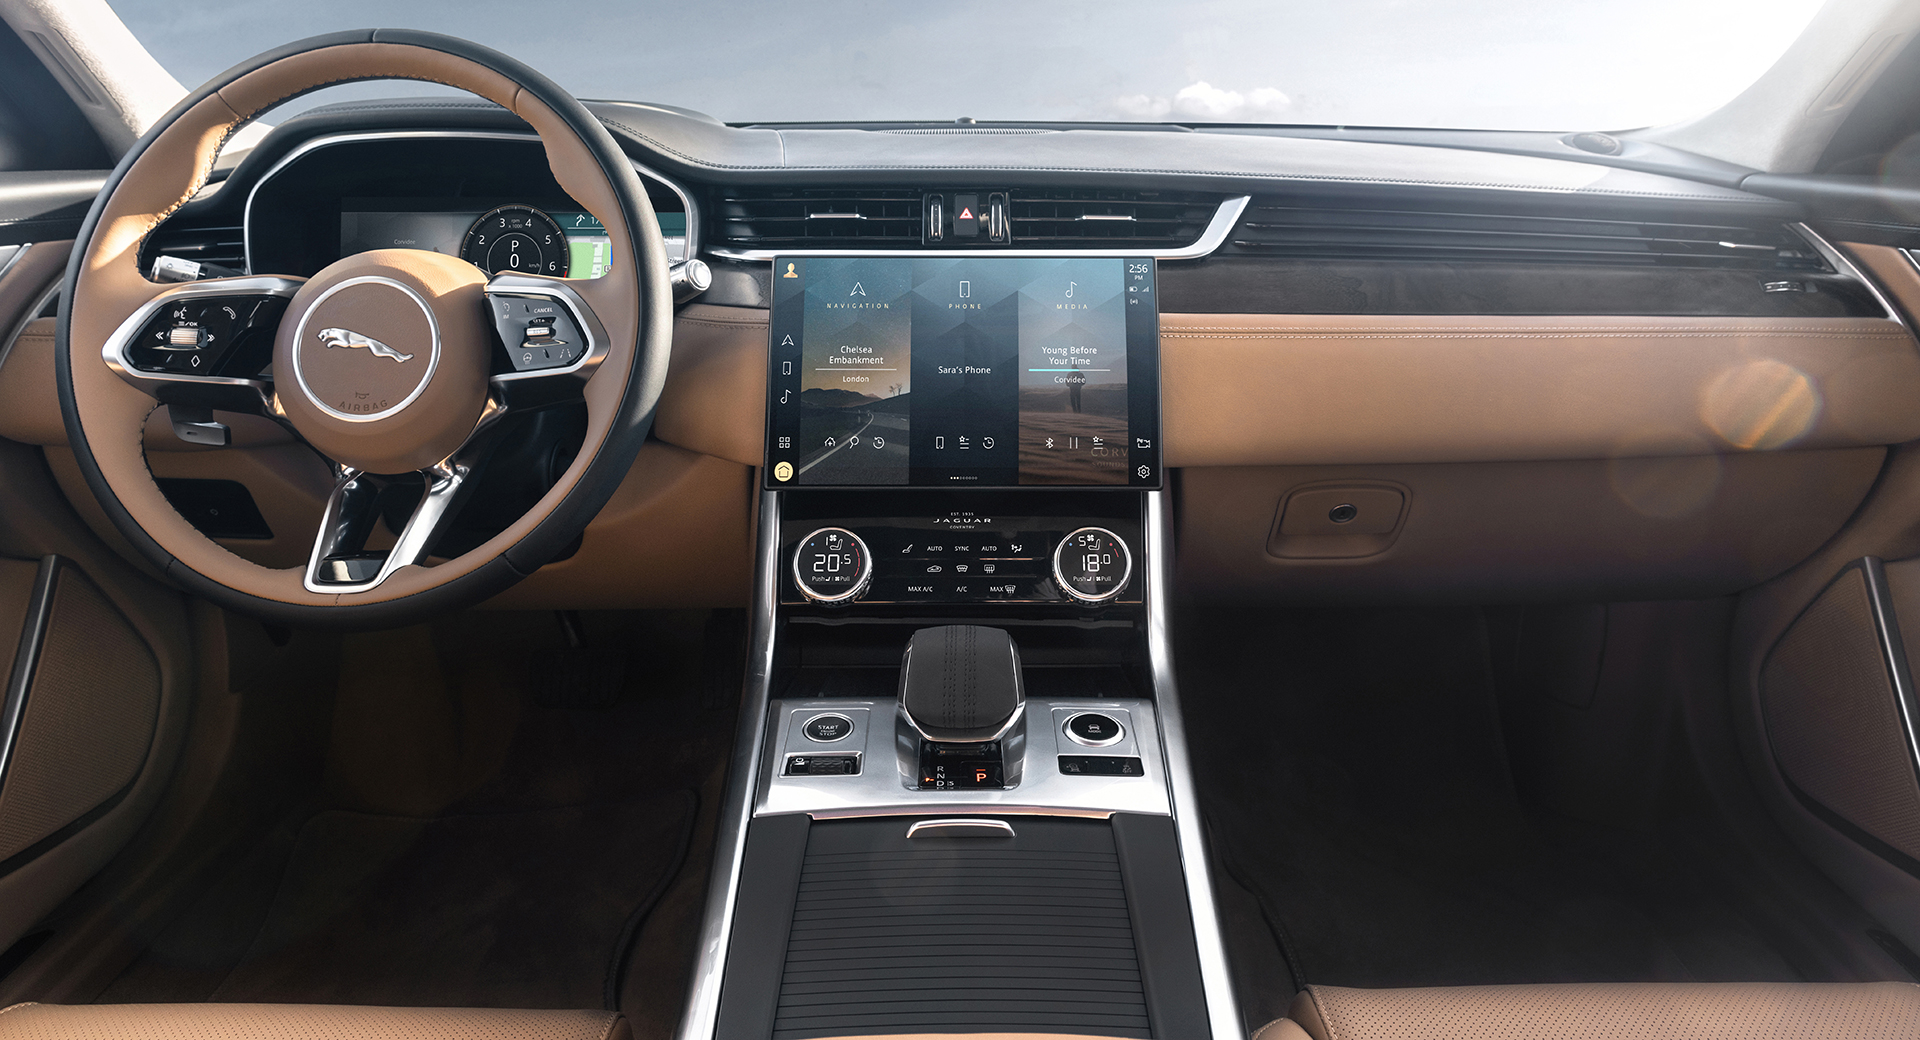 Jaguar XF Updated For 2021 With Revised Styling, A New Interior